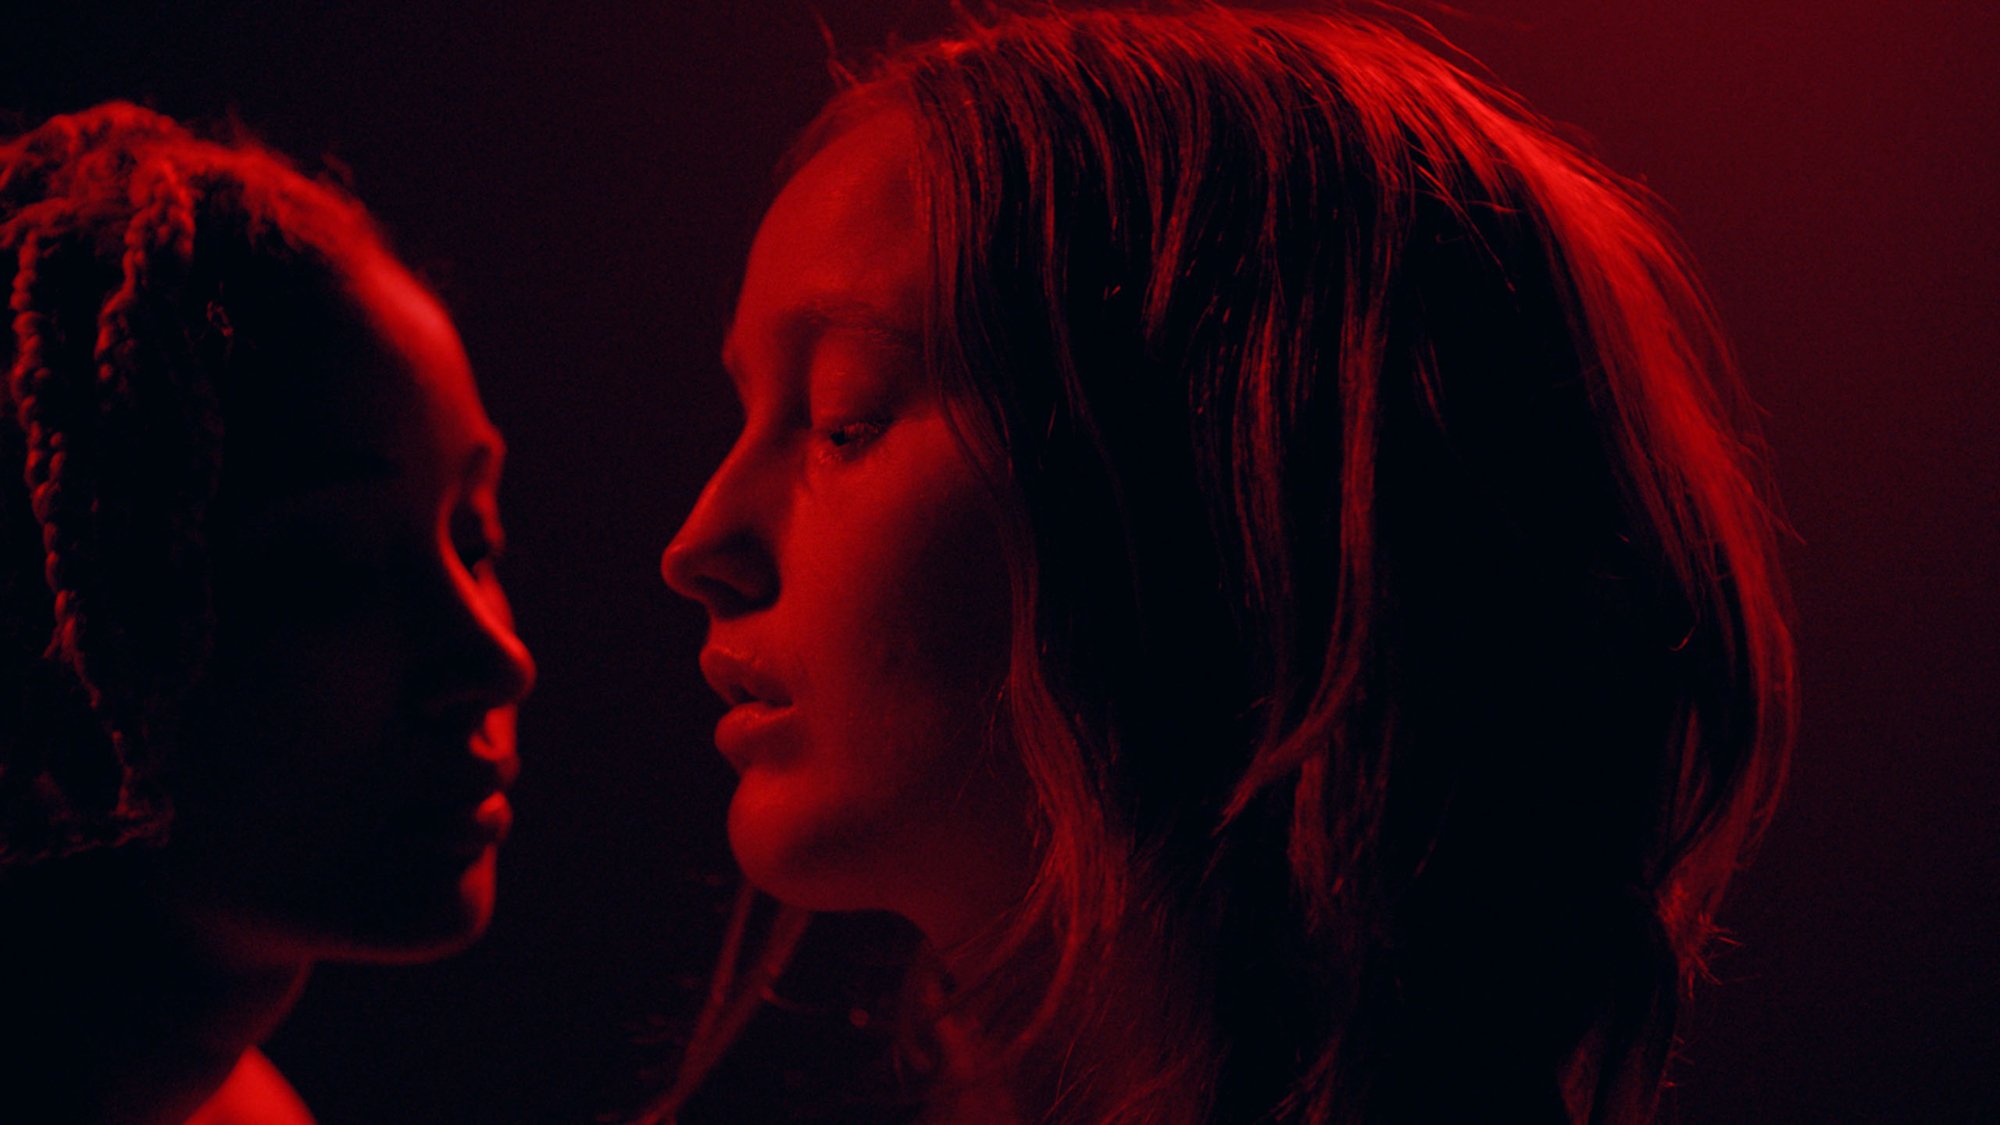 'My Animal' Amandla Stenberg as Jonny and Bobbi Salvör Menuez as Heather with each other's faces close together in red lighting